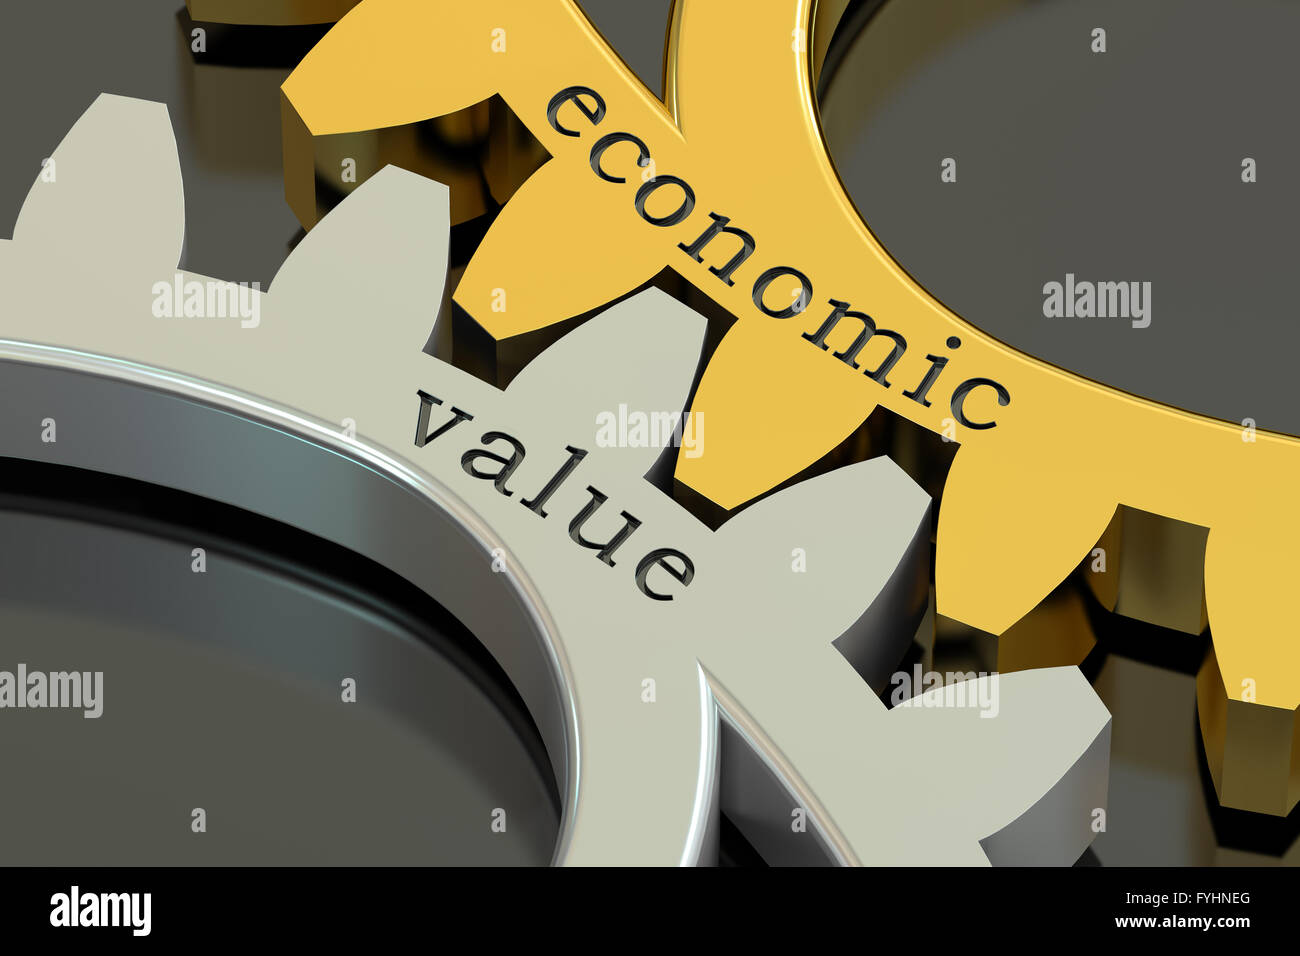 Economic Value concept on the gearwheels, 3D rendering Stock Photo